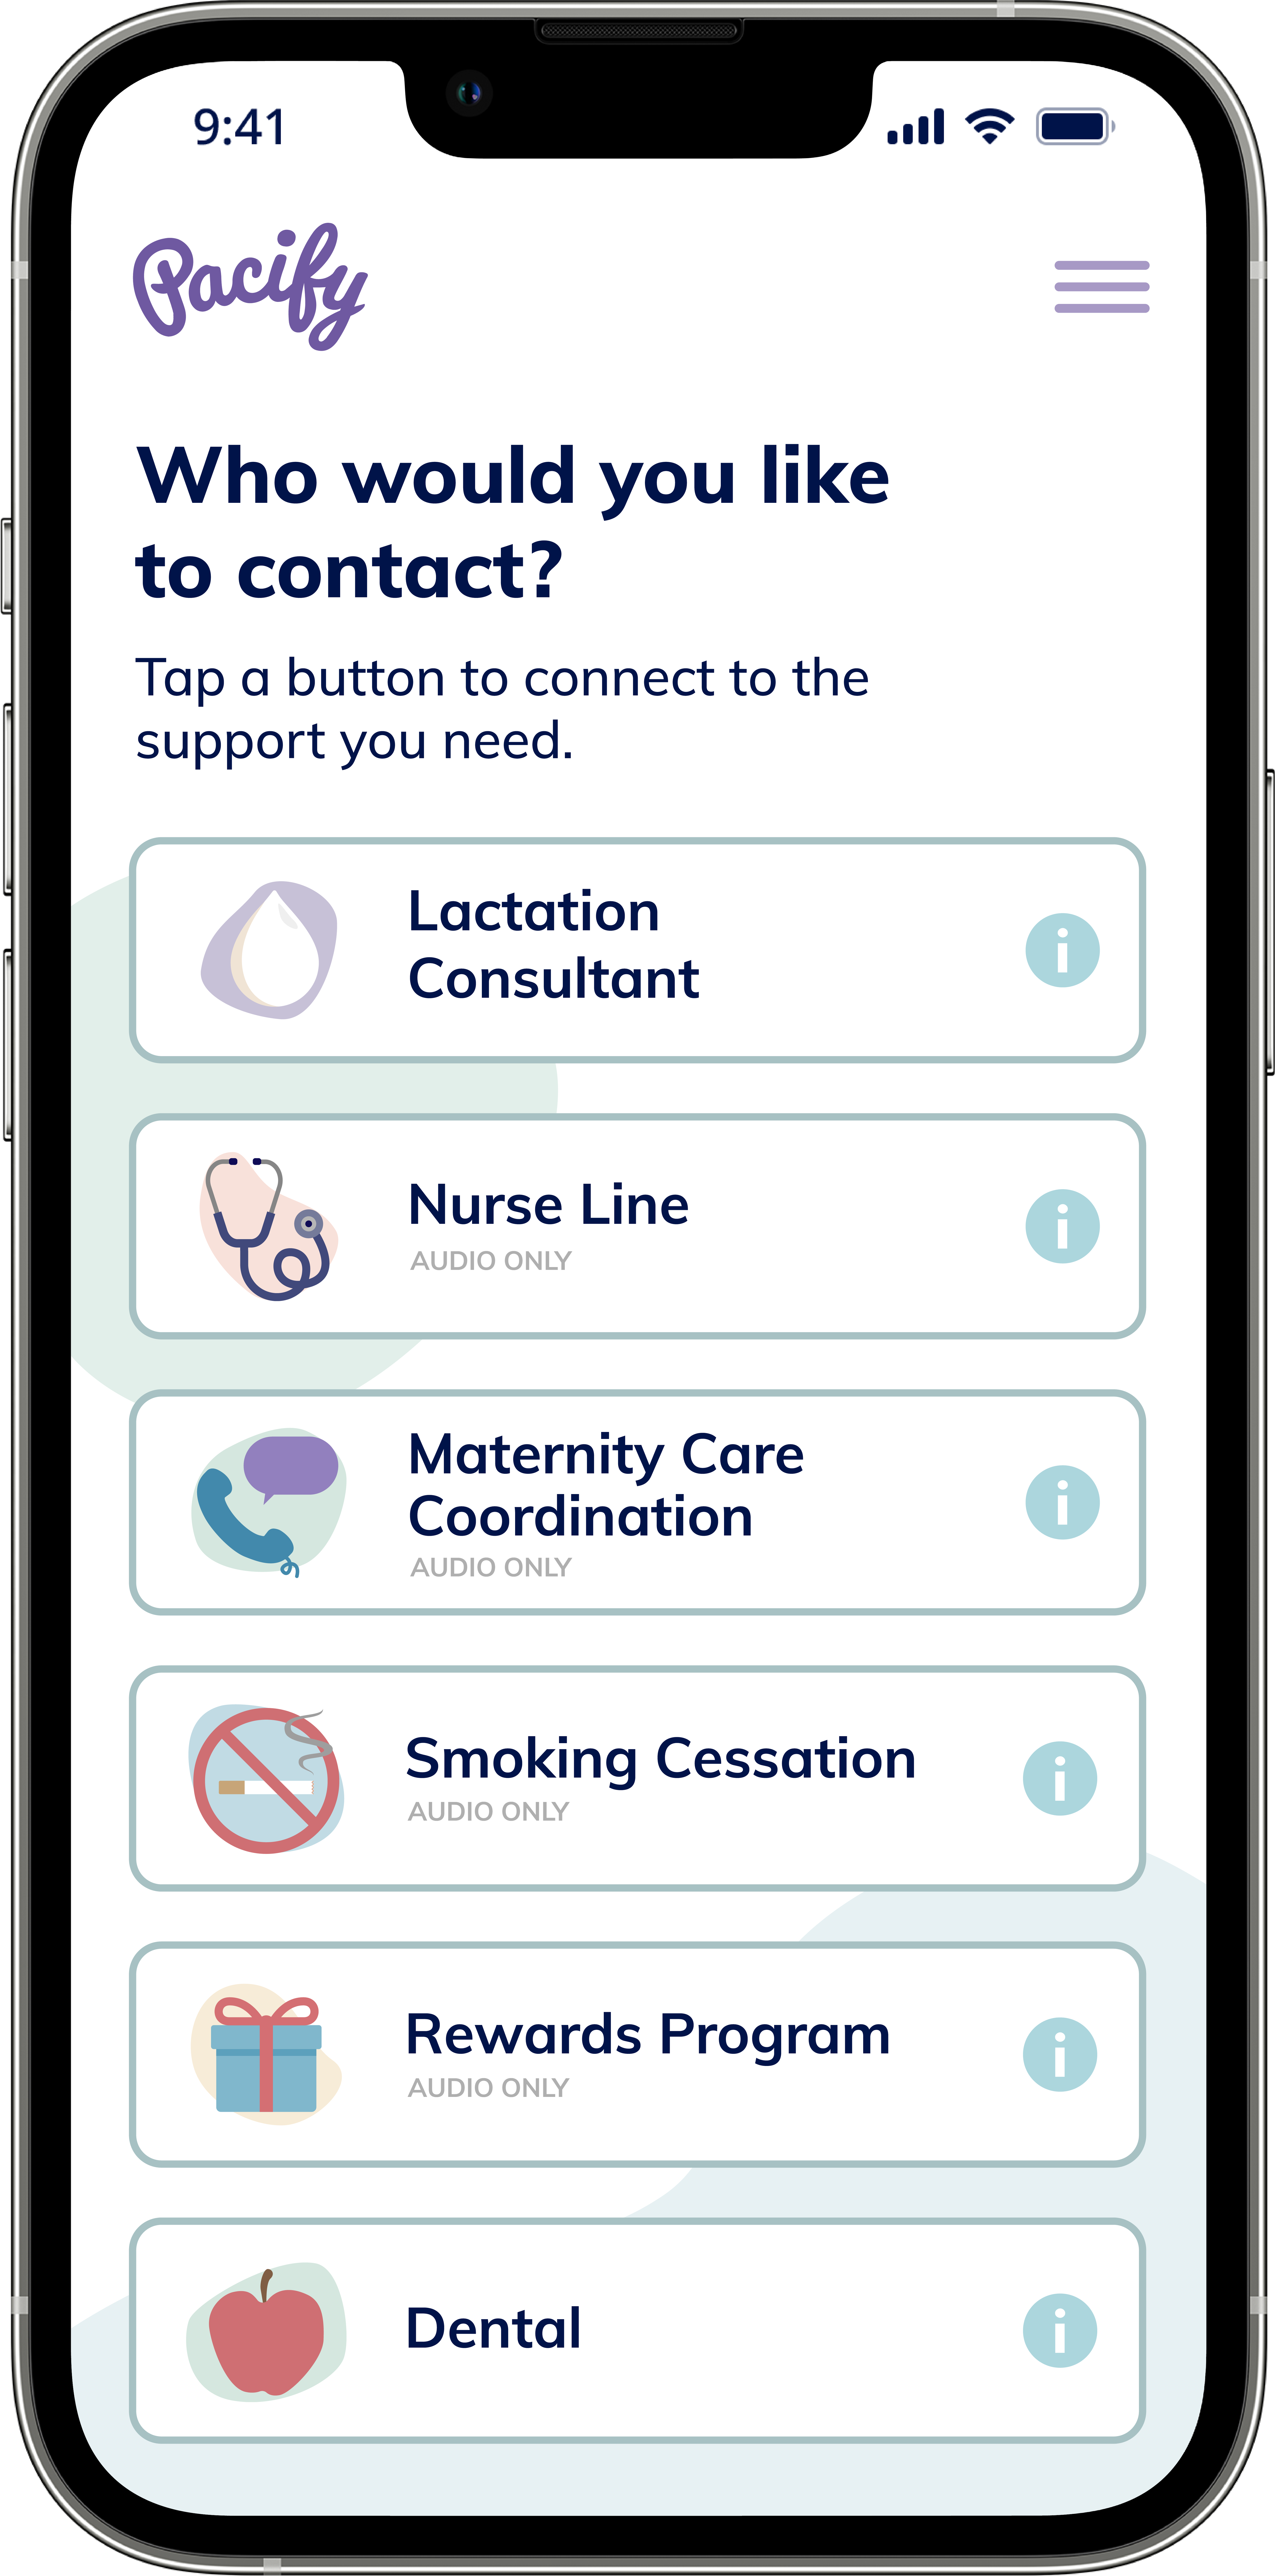 Pacify app home screen showing call options of Lactation Consultant, 24-hour Nurse Advice Line, Molina Case Management, Molina Member Services, and Molina Behavioral Health Crisis Line.